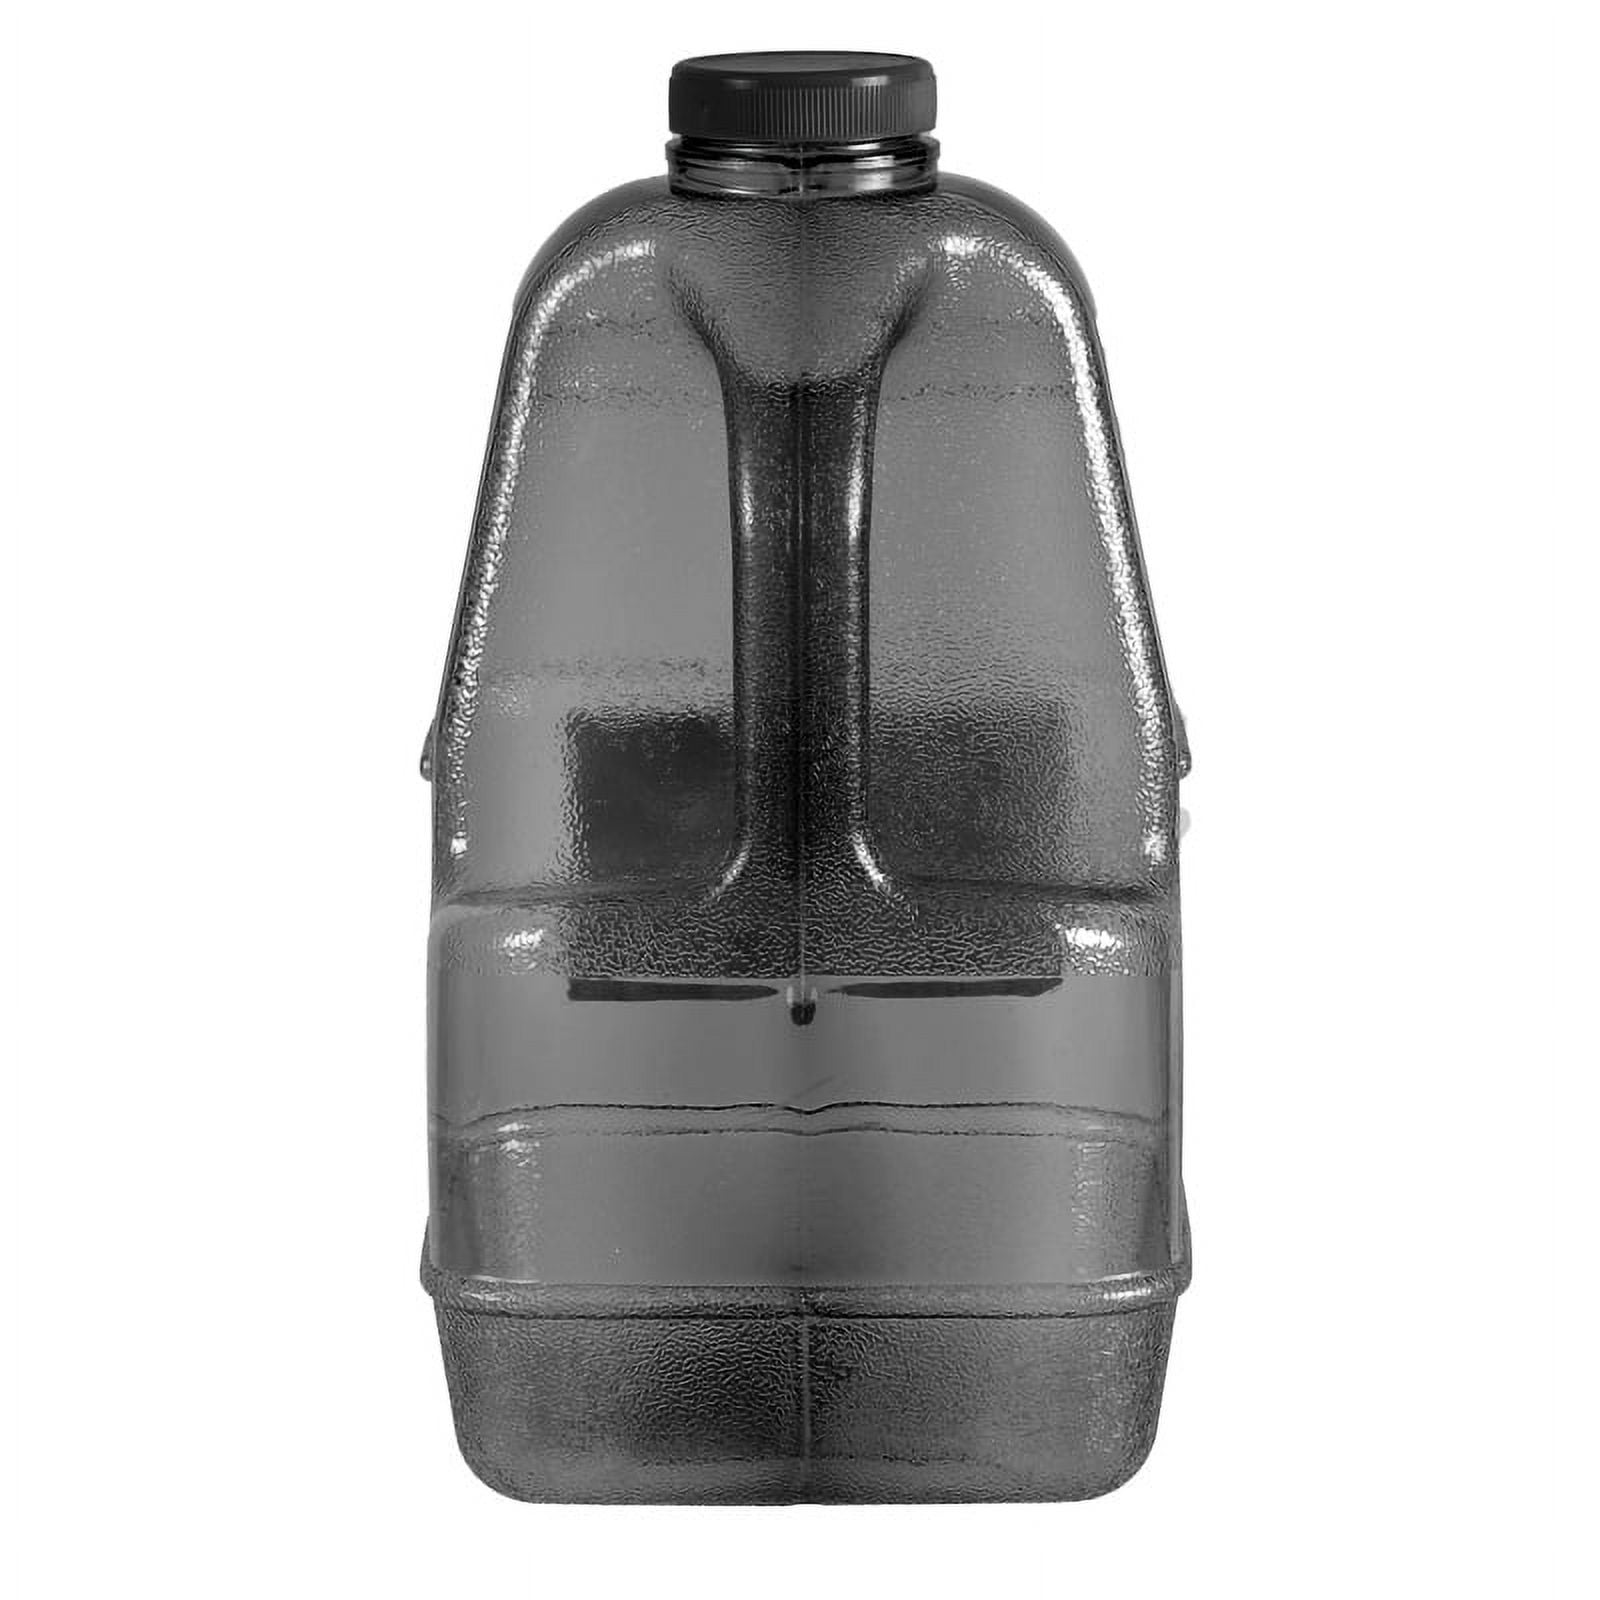 KAHITE Almost 1 Gallon Water Bottle, BPA Free Large Gallon Jug with Handle,  Leak-proof Big Water Jug…See more KAHITE Almost 1 Gallon Water Bottle, BPA